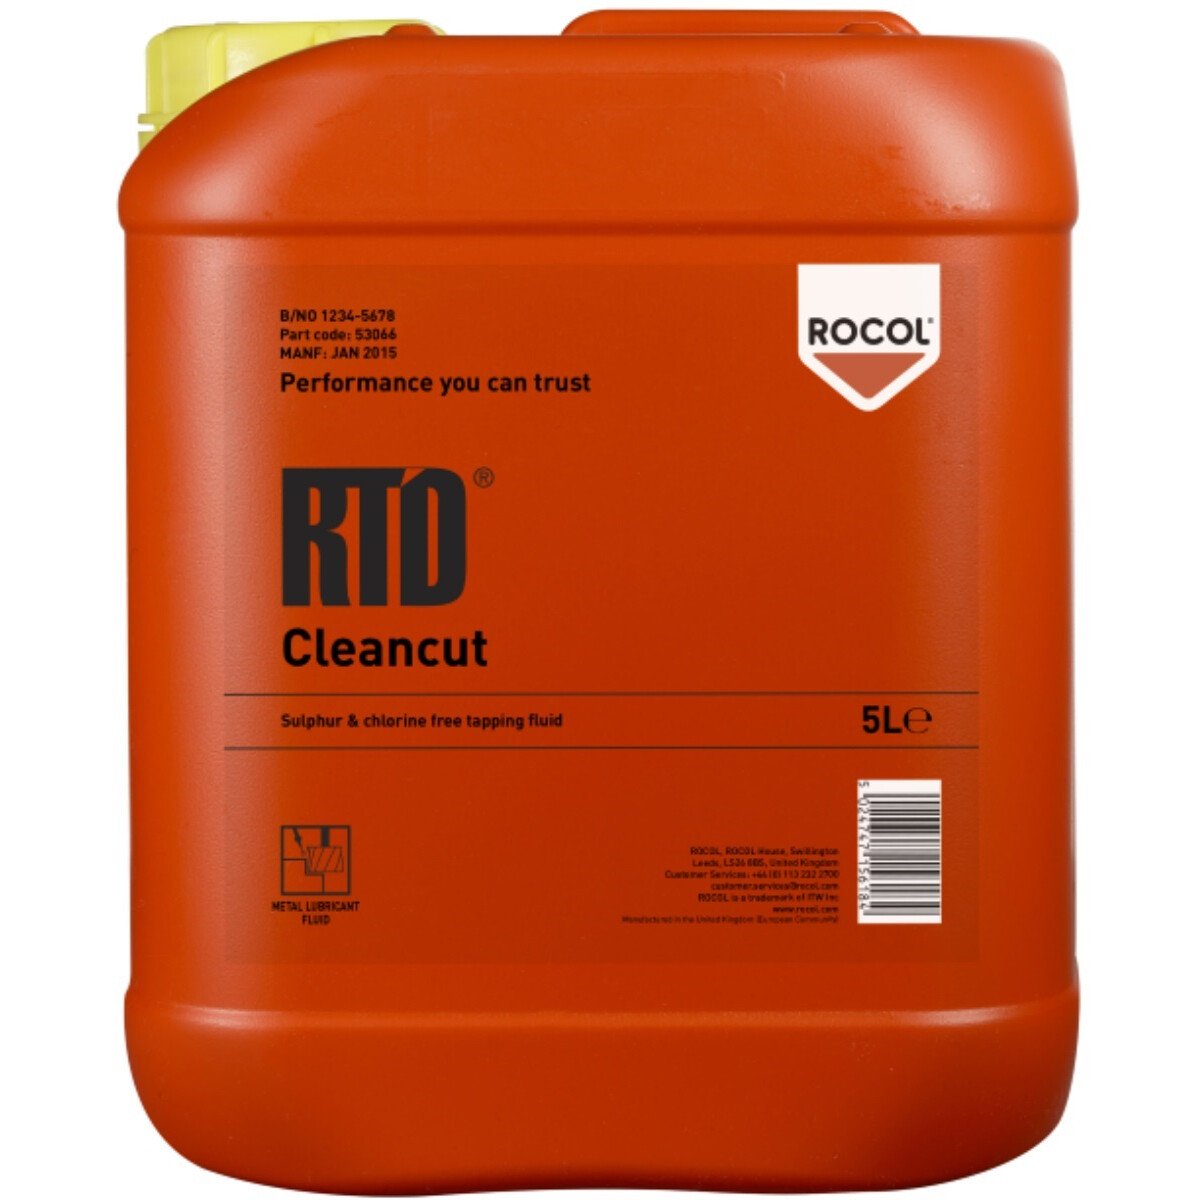 Rocol 53066 RTD Cleancut - Sulphur and Chlorine Free Tapping Fluid 5ltr